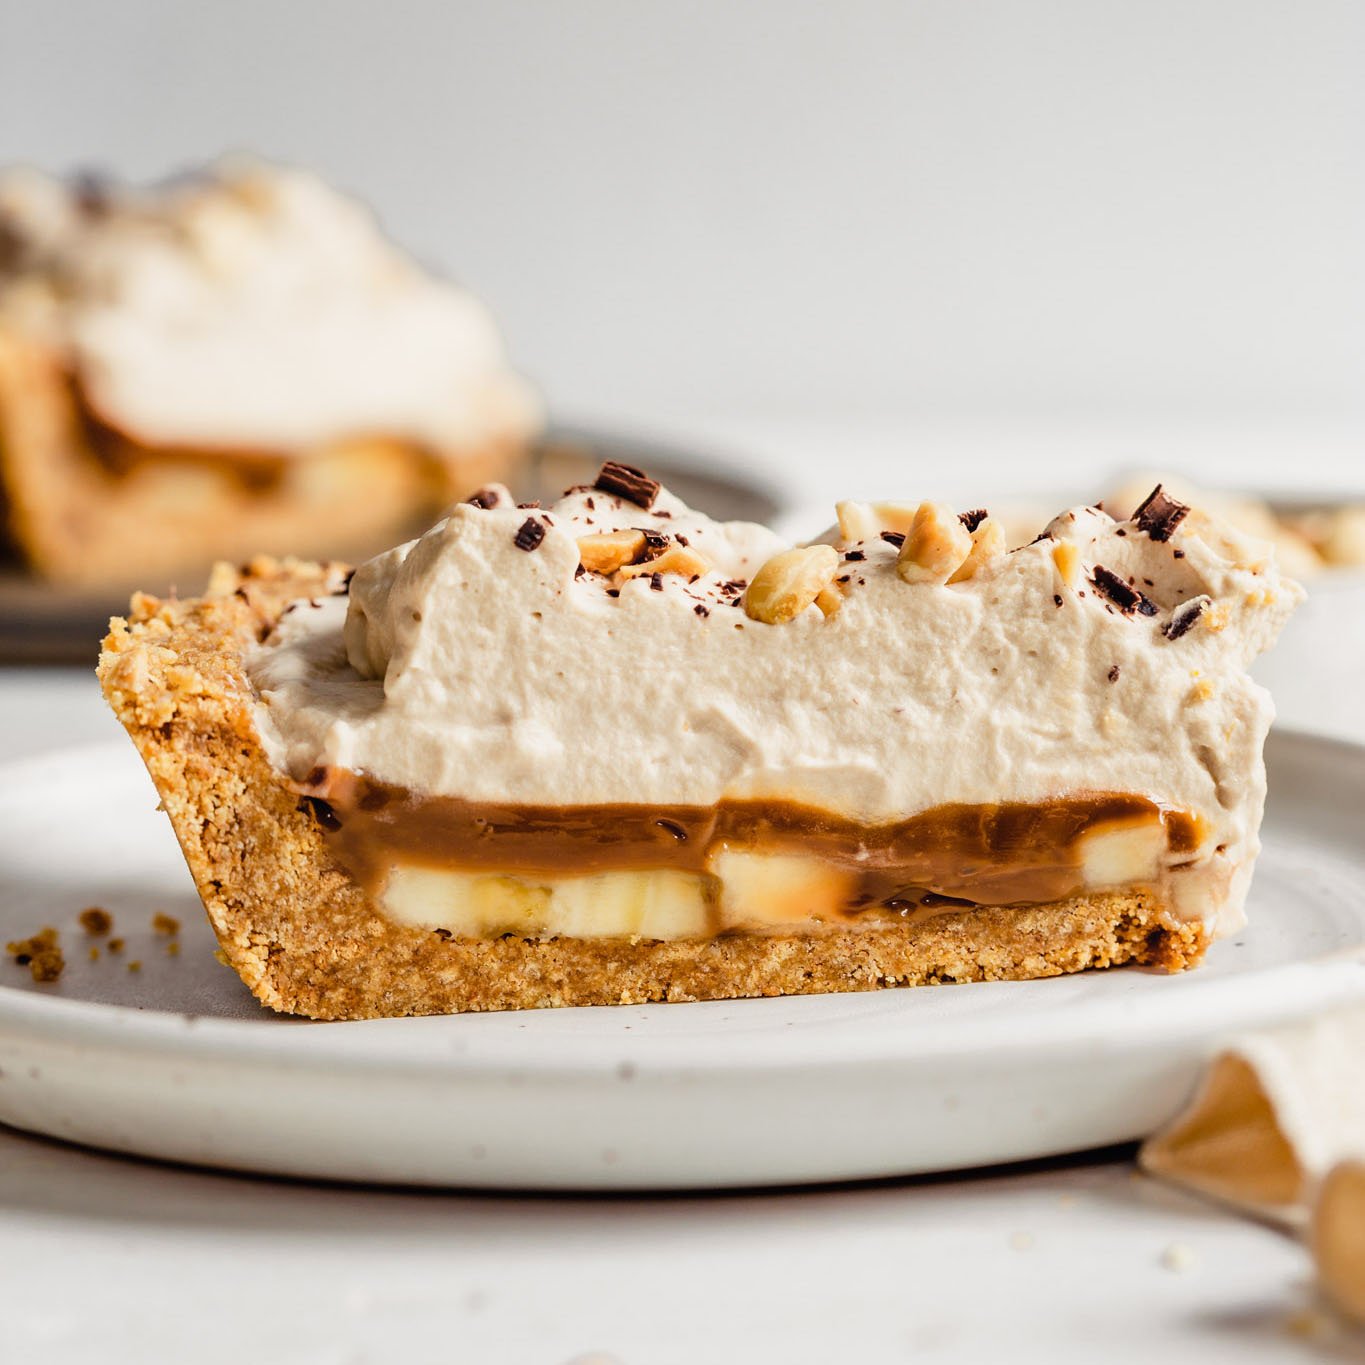 Slice of pie on white plate with layers of sliced bananas, dulce de leche, coffee whipped cream, and chopped peanuts on top.